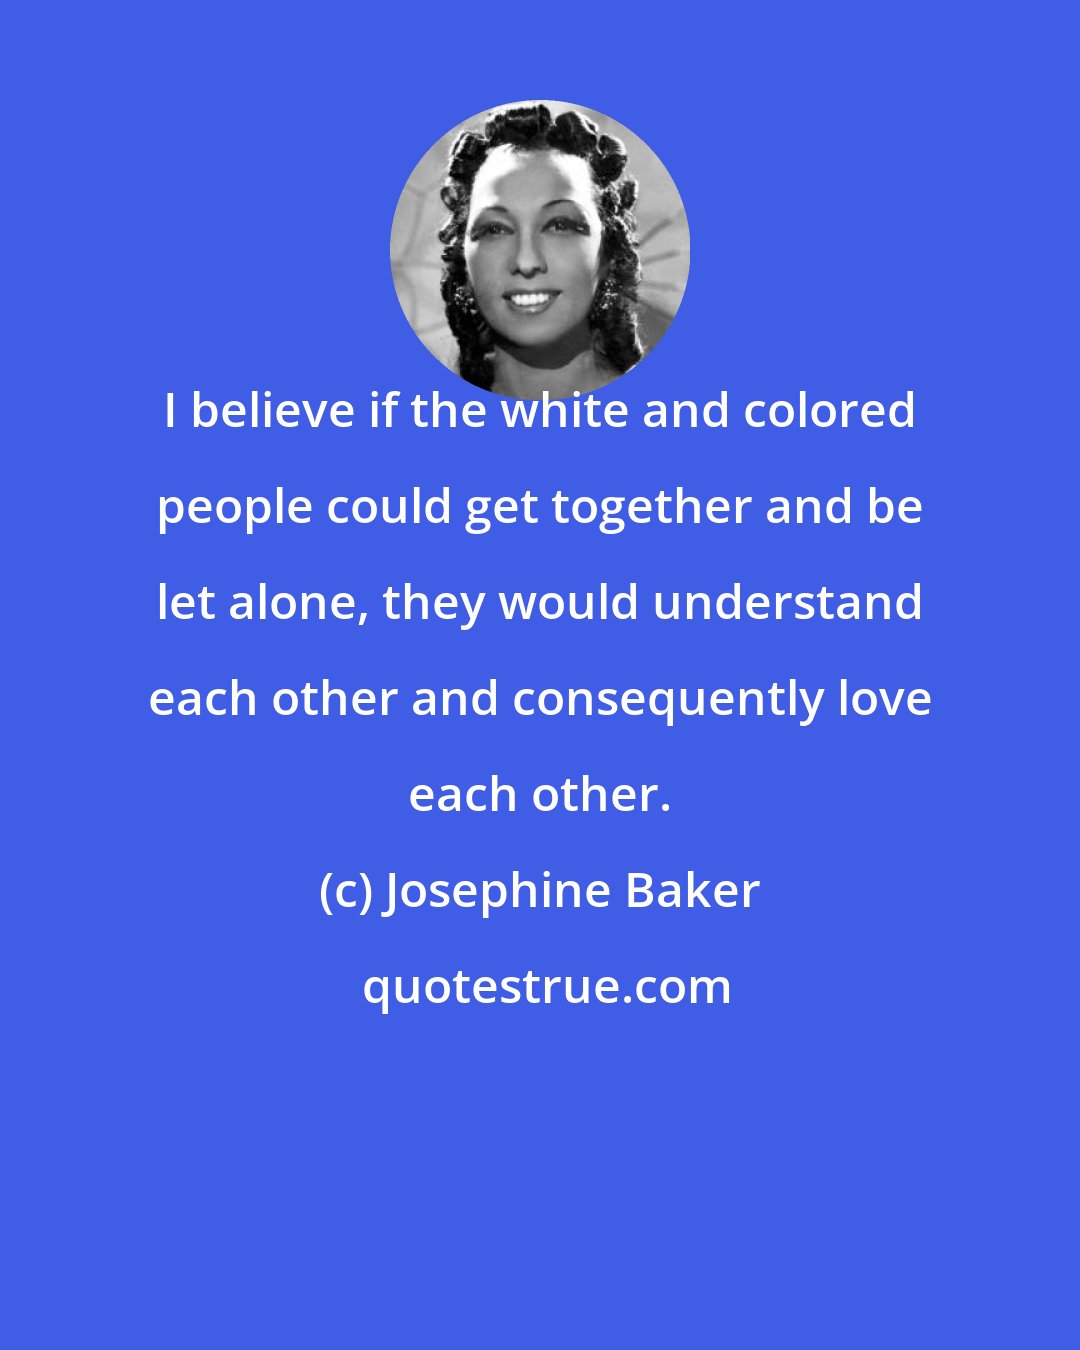 Josephine Baker: I believe if the white and colored people could get together and be let alone, they would understand each other and consequently love each other.